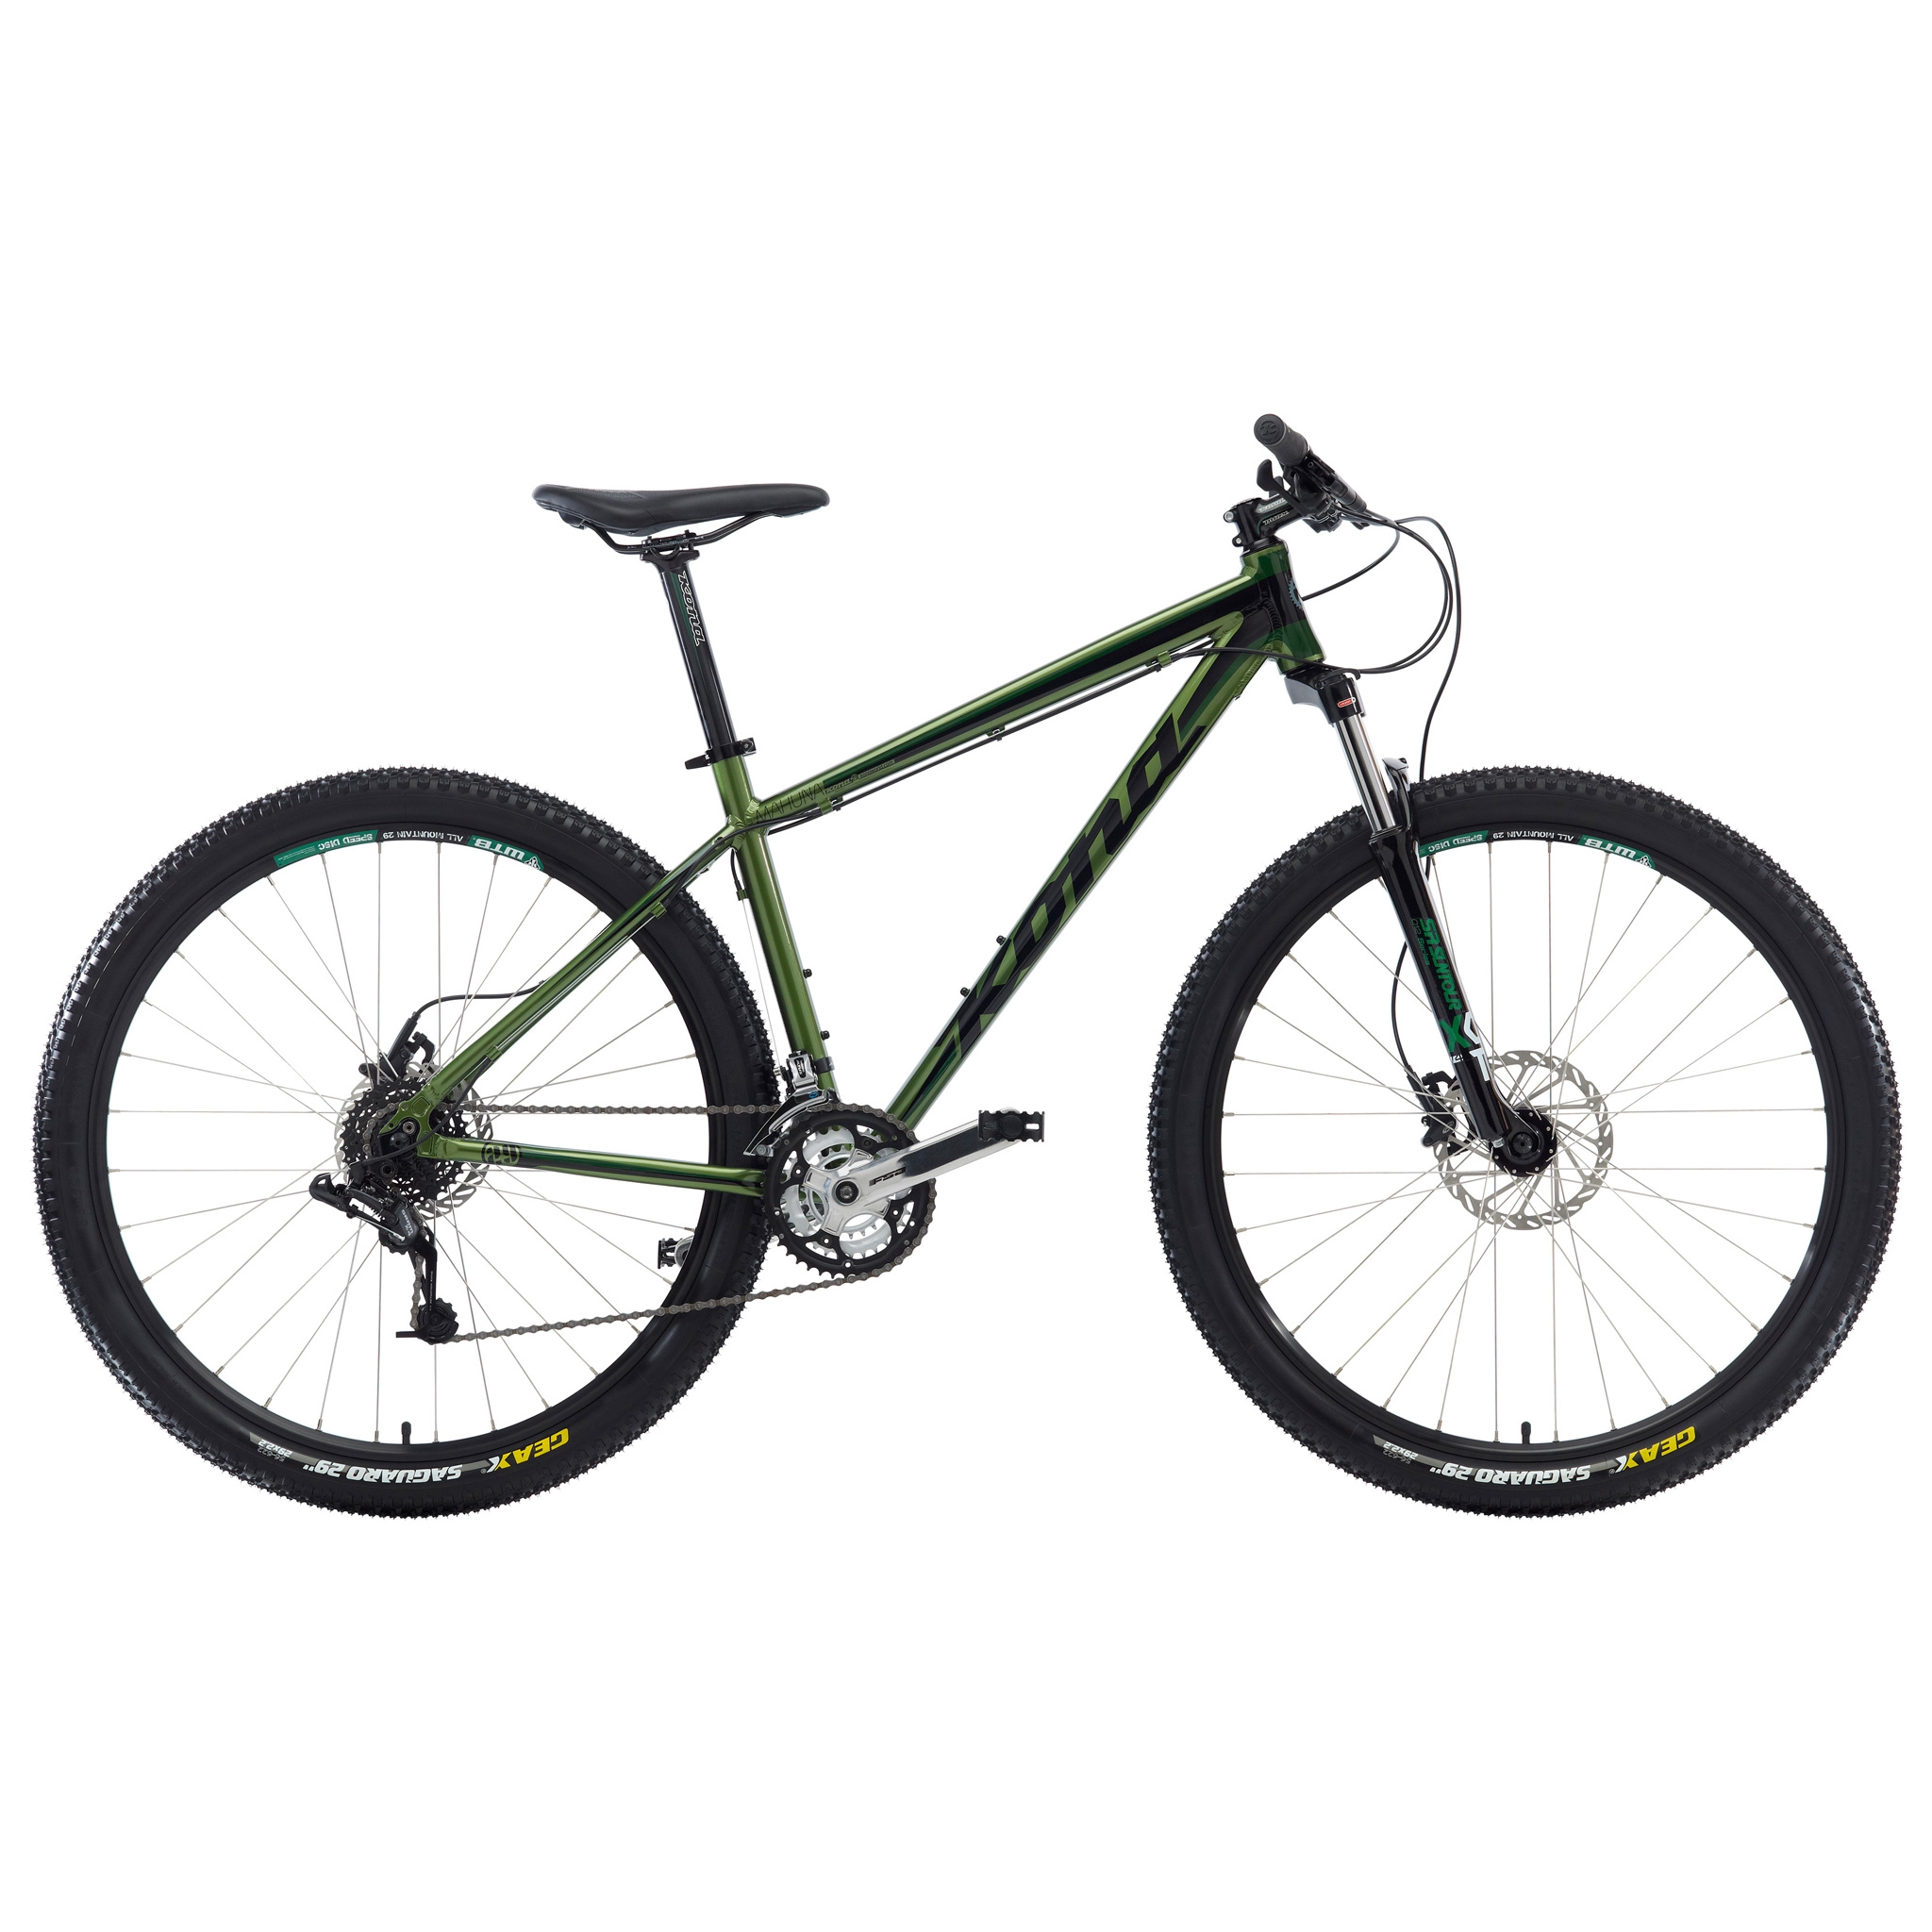 http://www.probikeshop.com/images/products2/282/80586/80586-kona-velo-complet-mahuna-vert.jpg